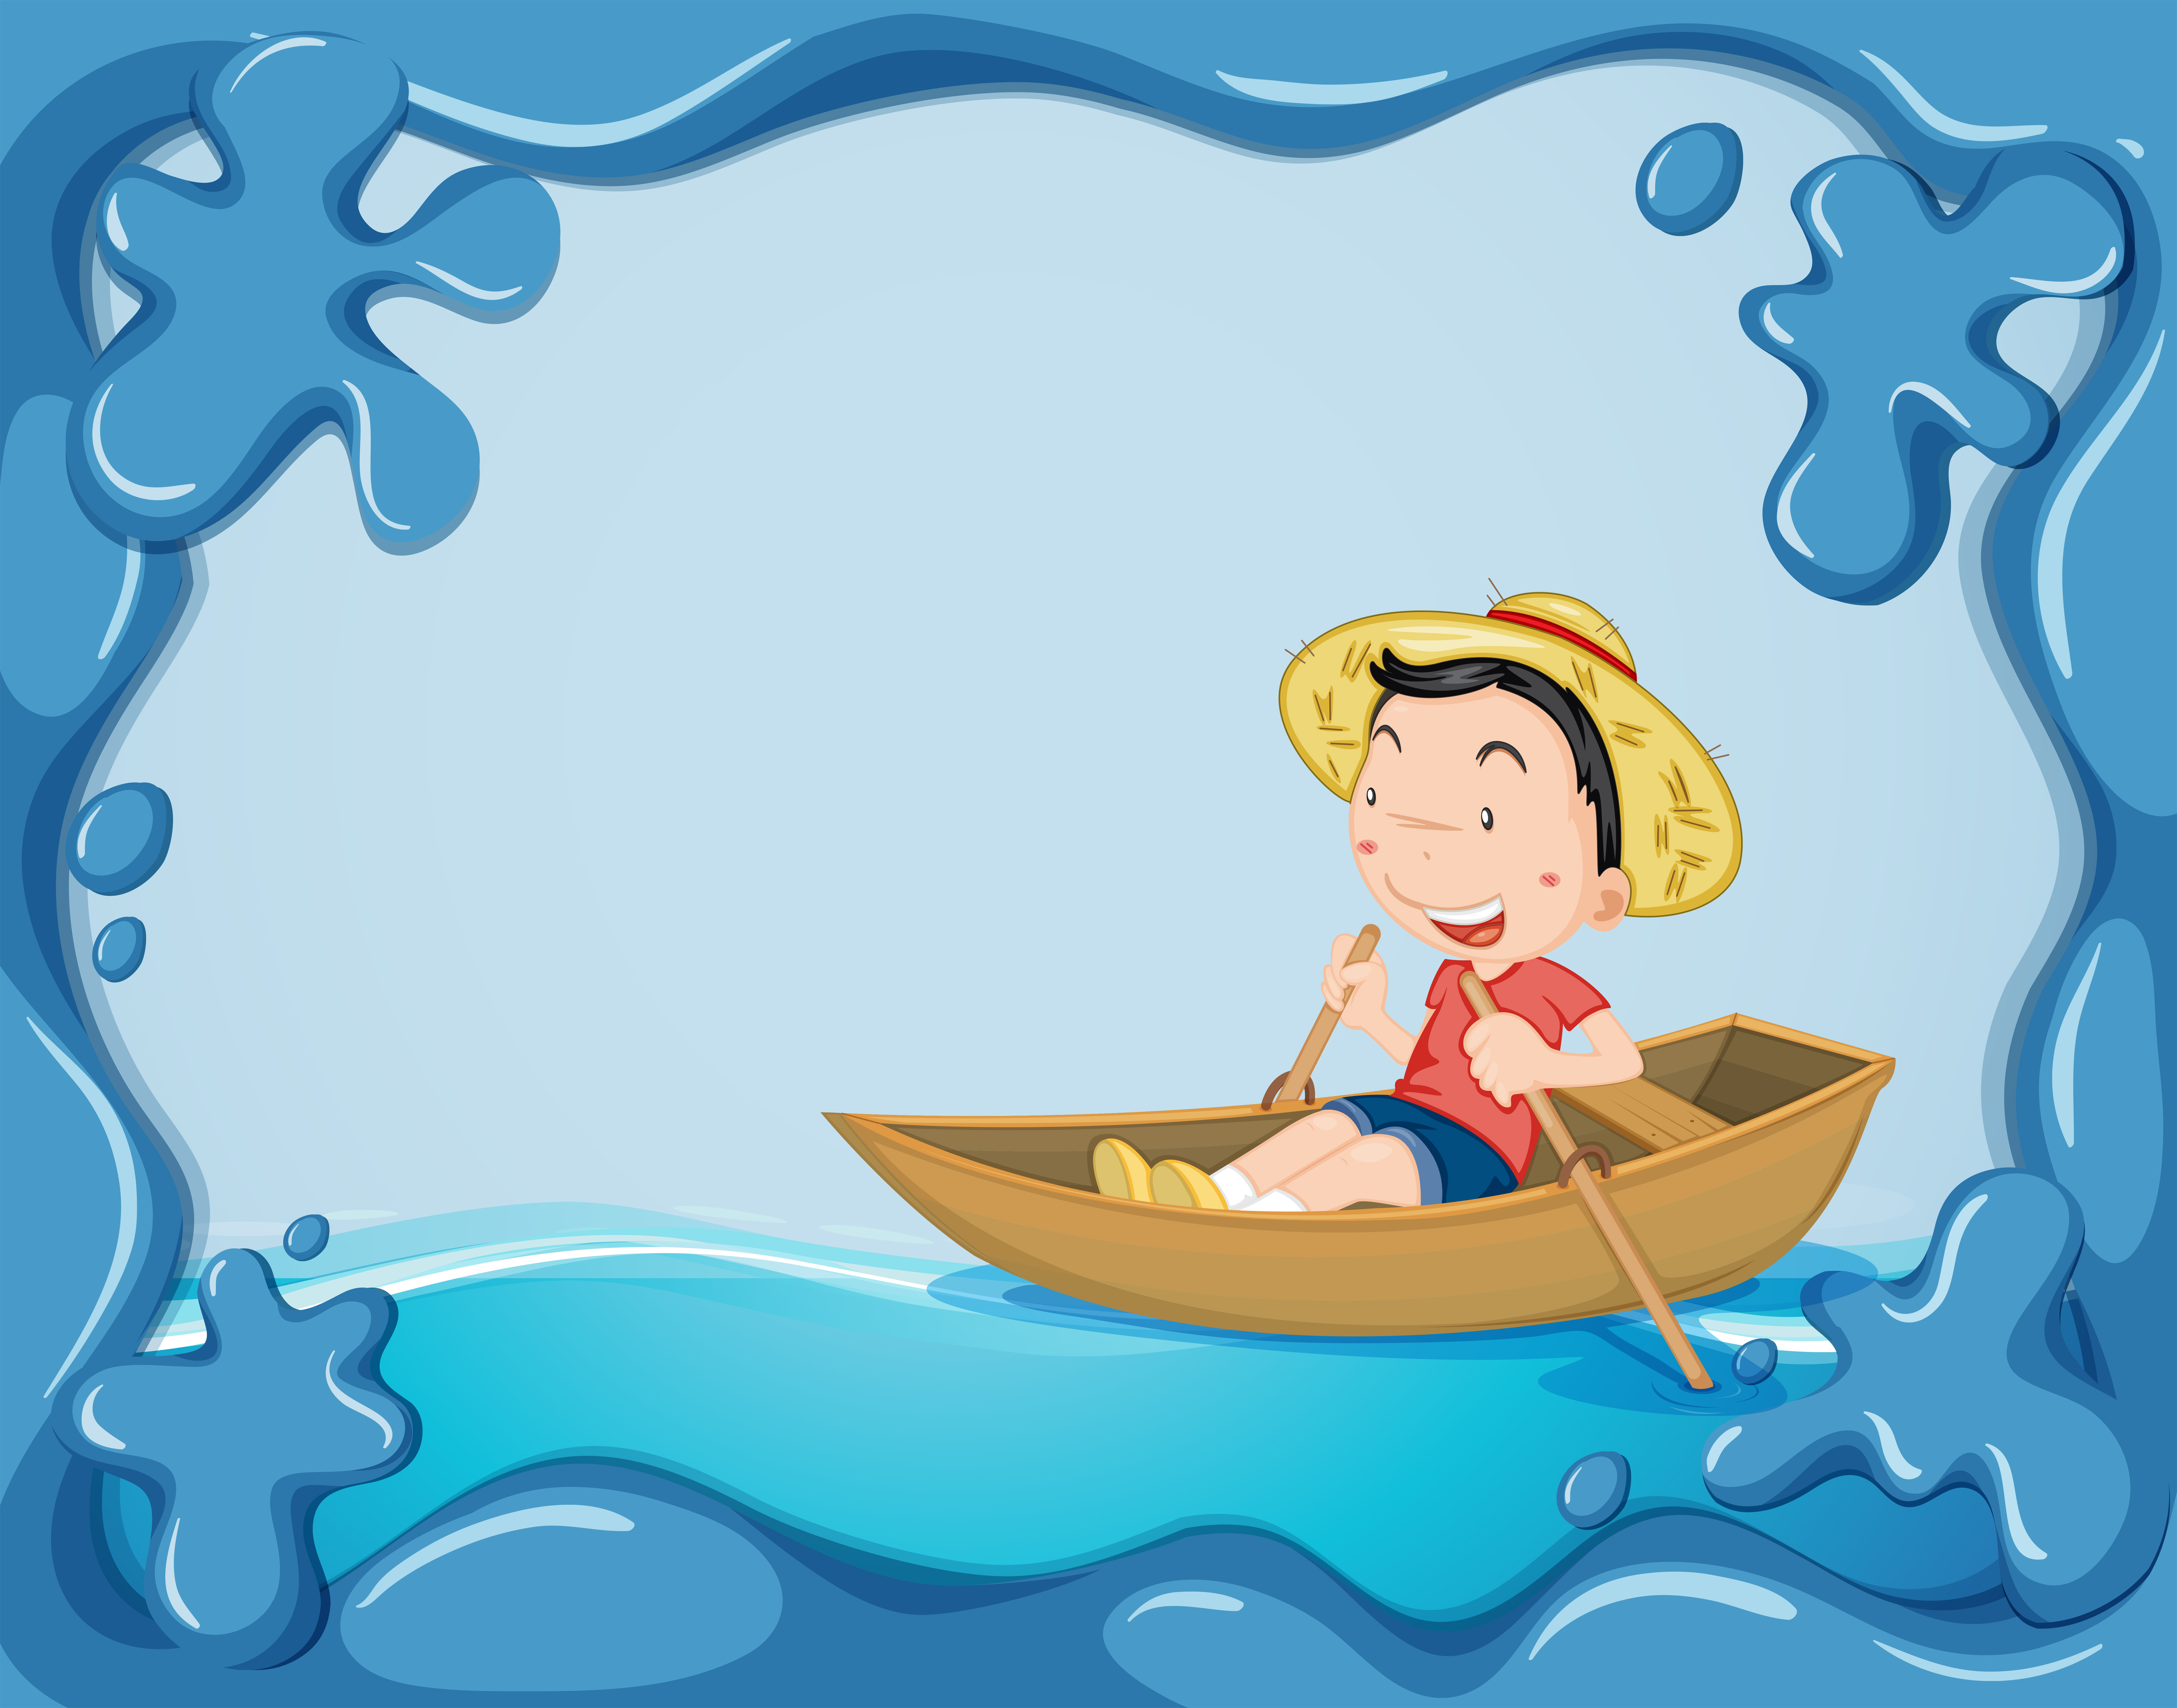 frame template with boy rowing boat - download free